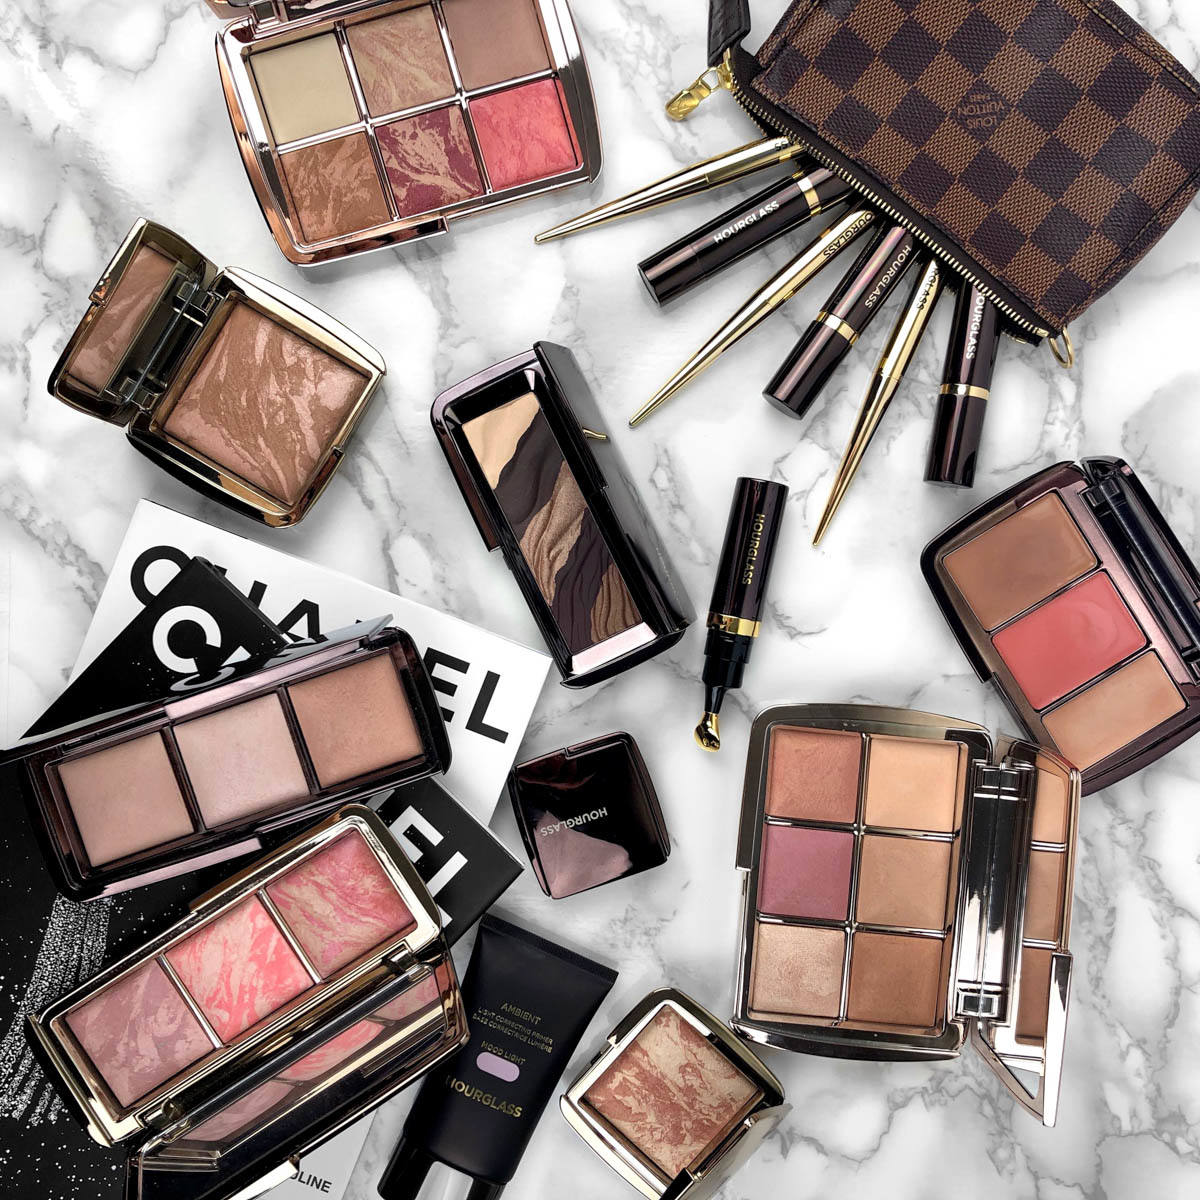 Best Hourglass Cosmetics Products